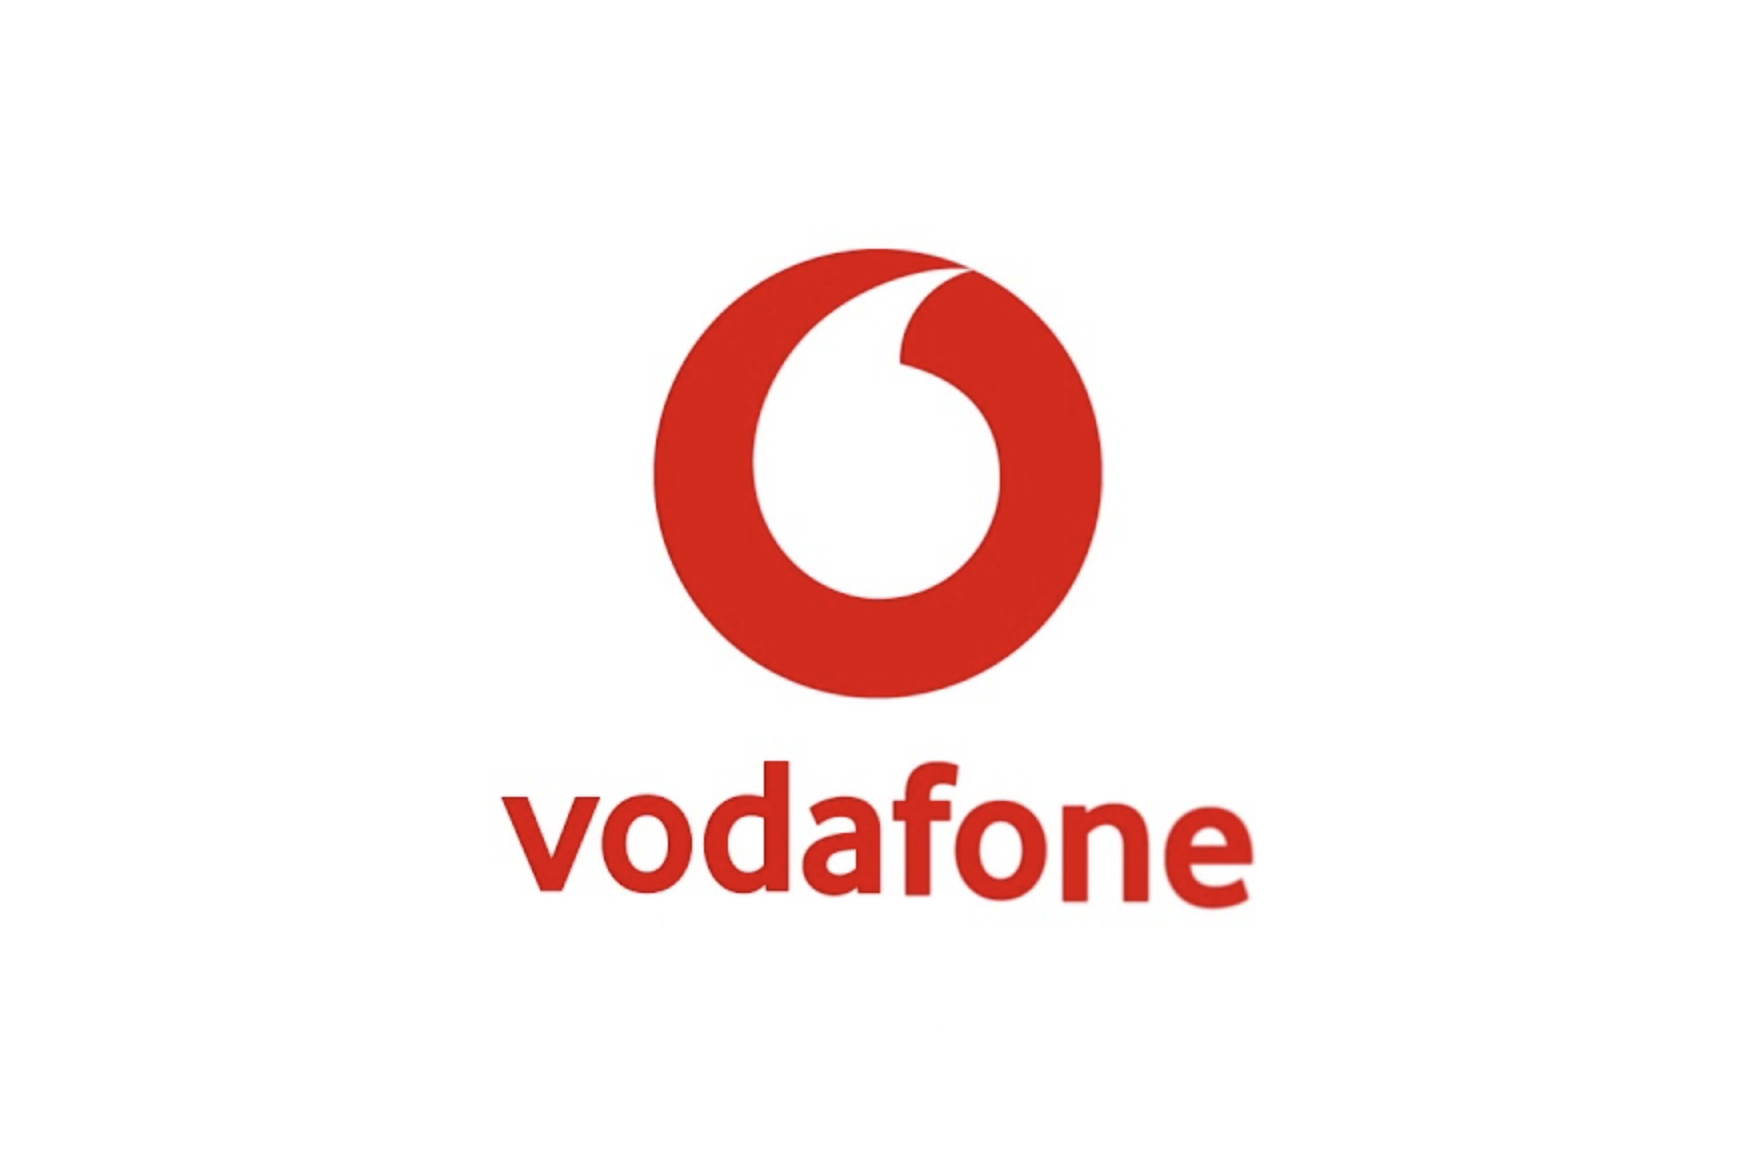 Vodafone is ideal for pay-as-you-go deals.